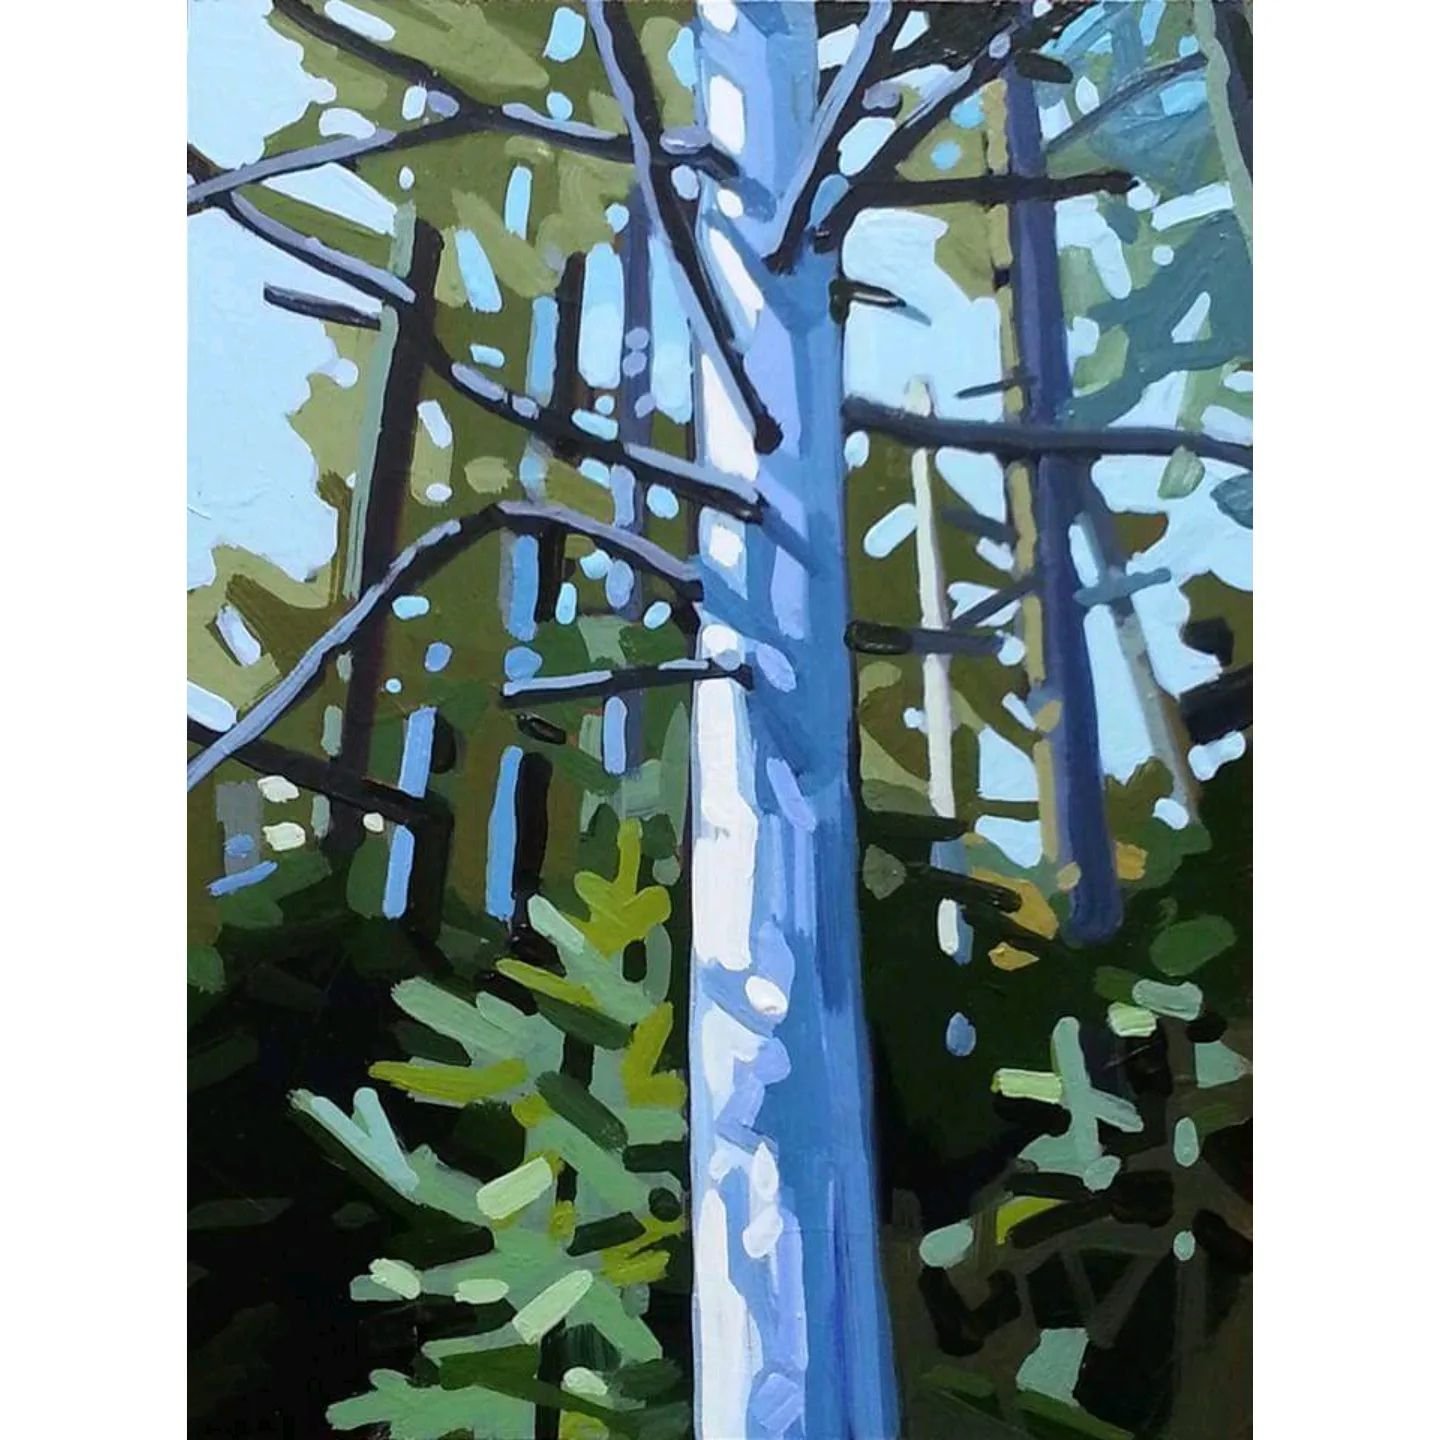 On the theme of our woodland, A lovely little 5x7 from a couple years ago. 

Sold.